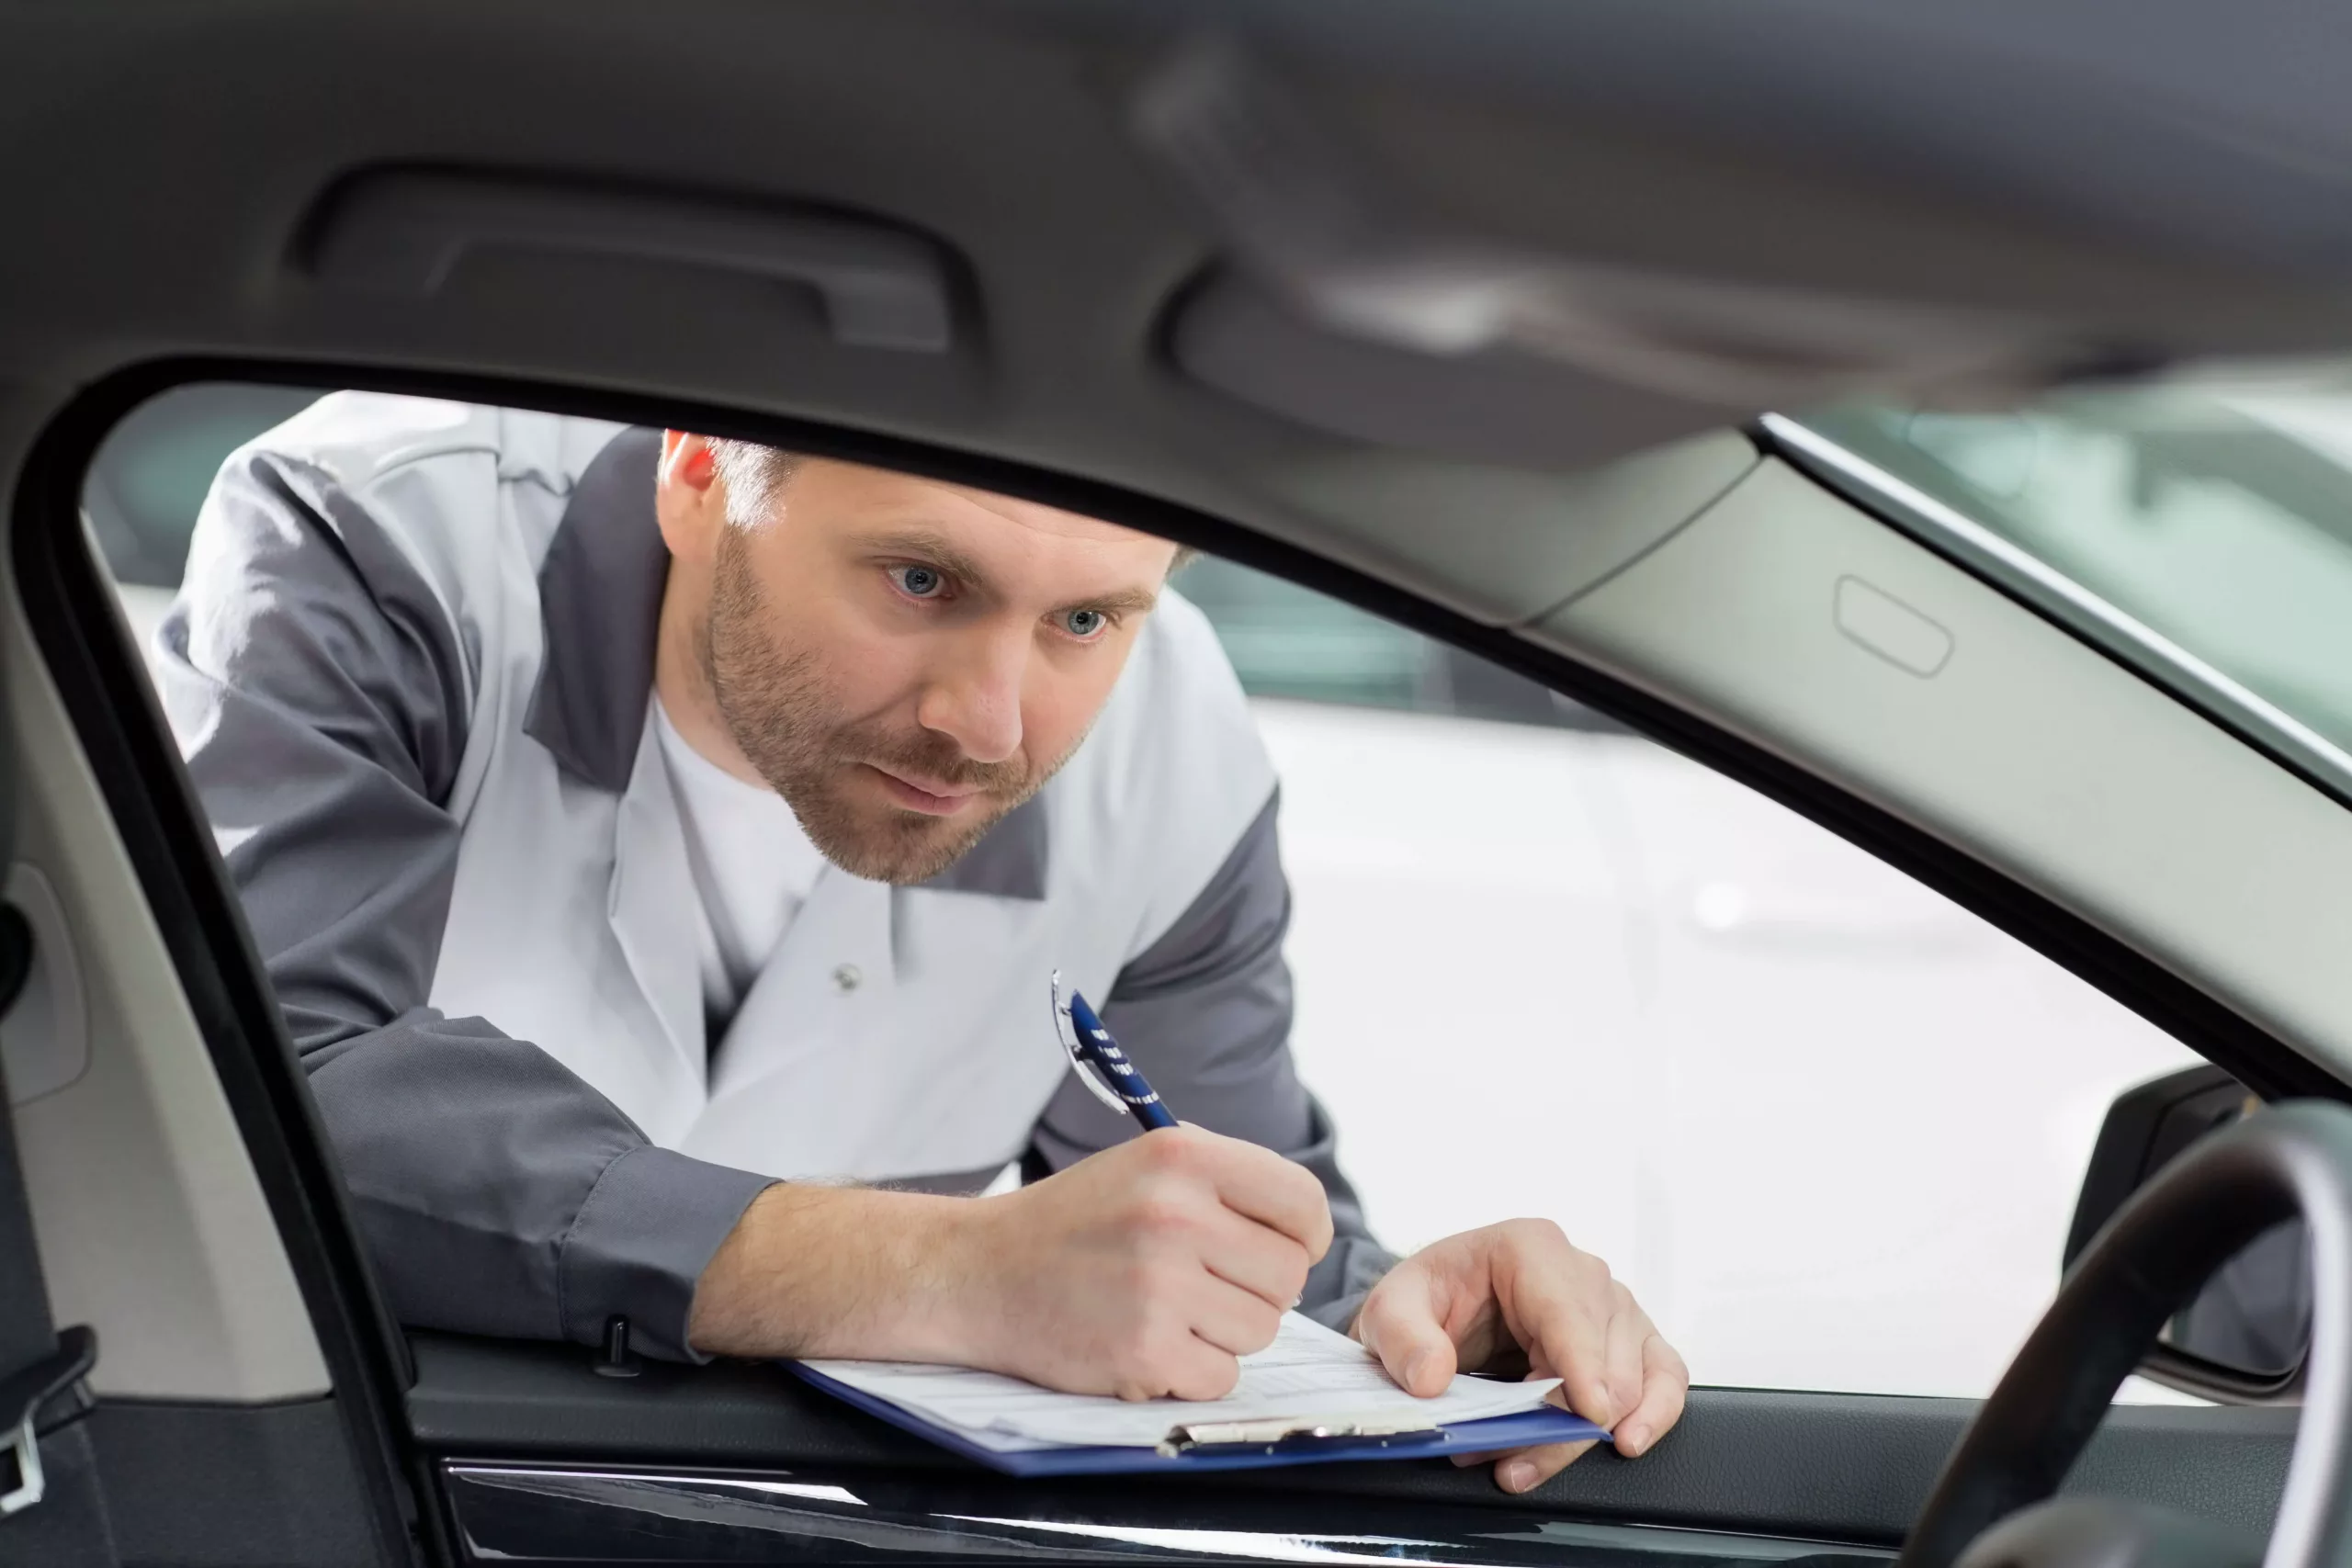 Bodyshop employee examining car taking notes on a clipboard scaled